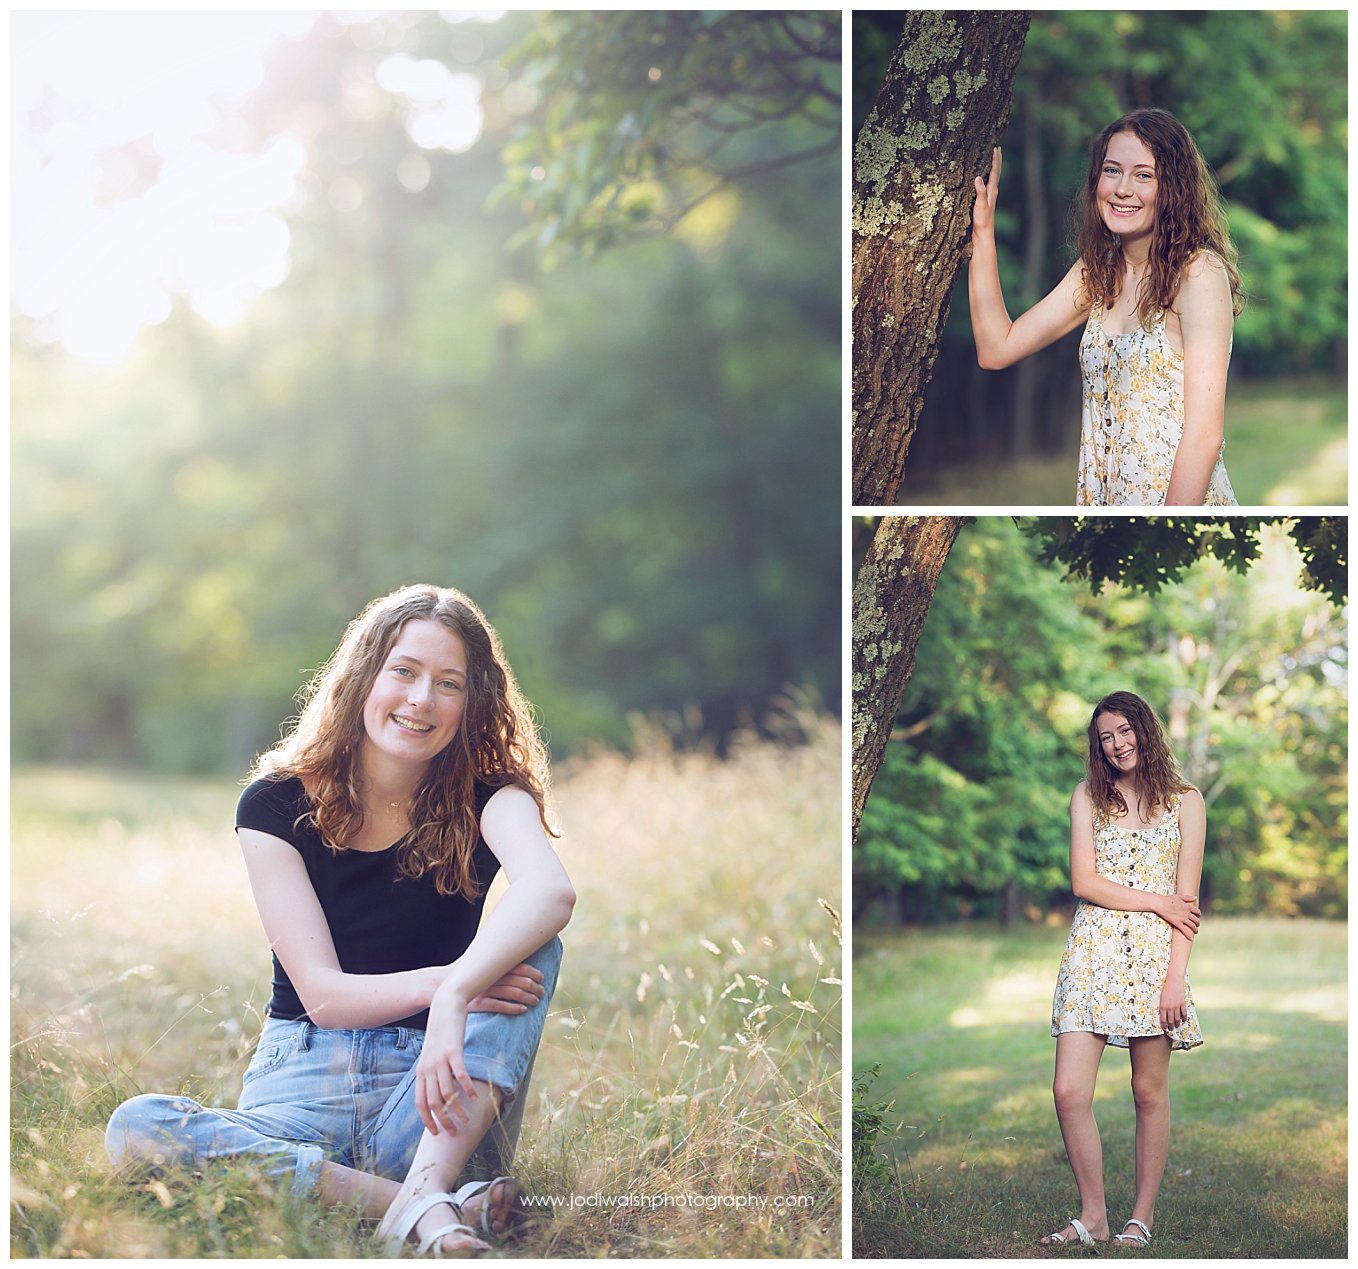 images of a senior girl in North Park.  She's wearing jeans and sitting in the grass.  She's wearing a white dress with flowers and standing next to a tree.